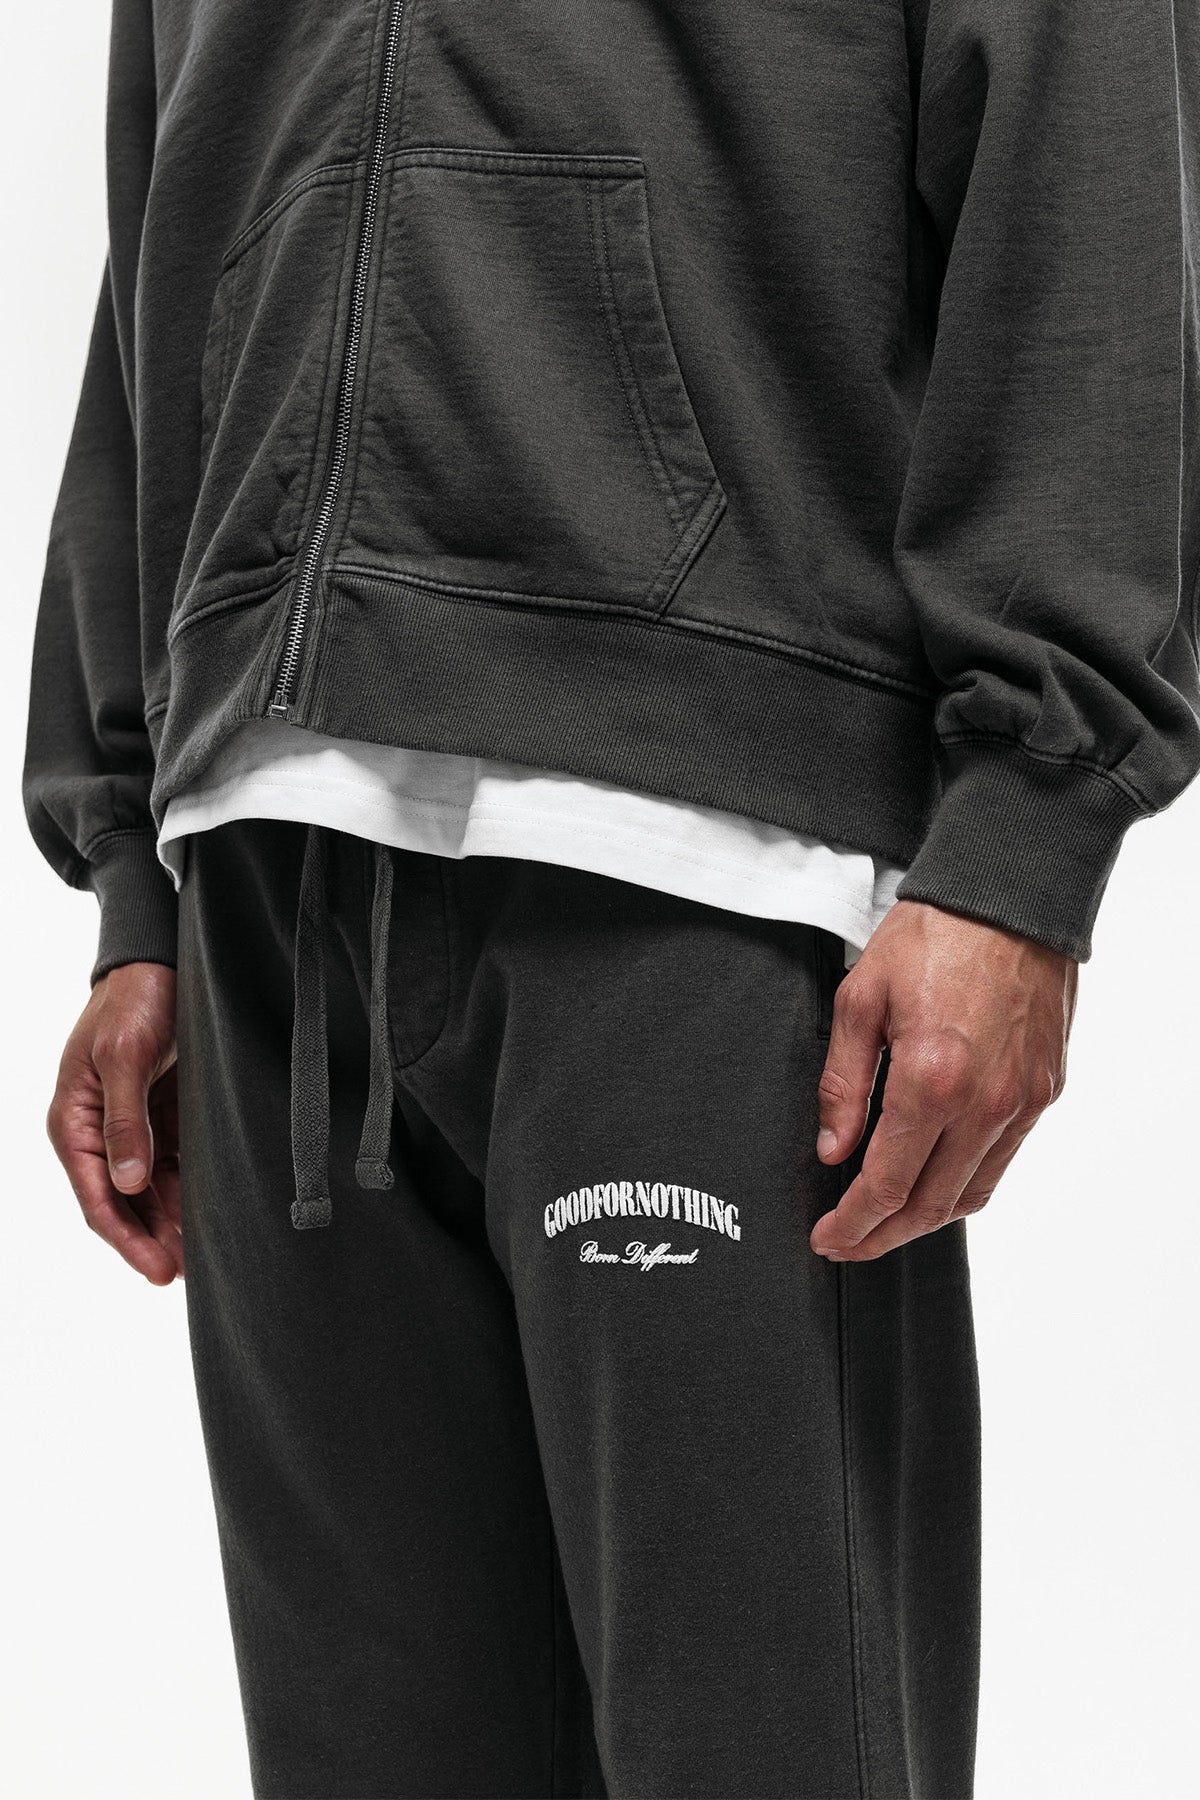 Relaxed Garment Dyed Black Sweatpants